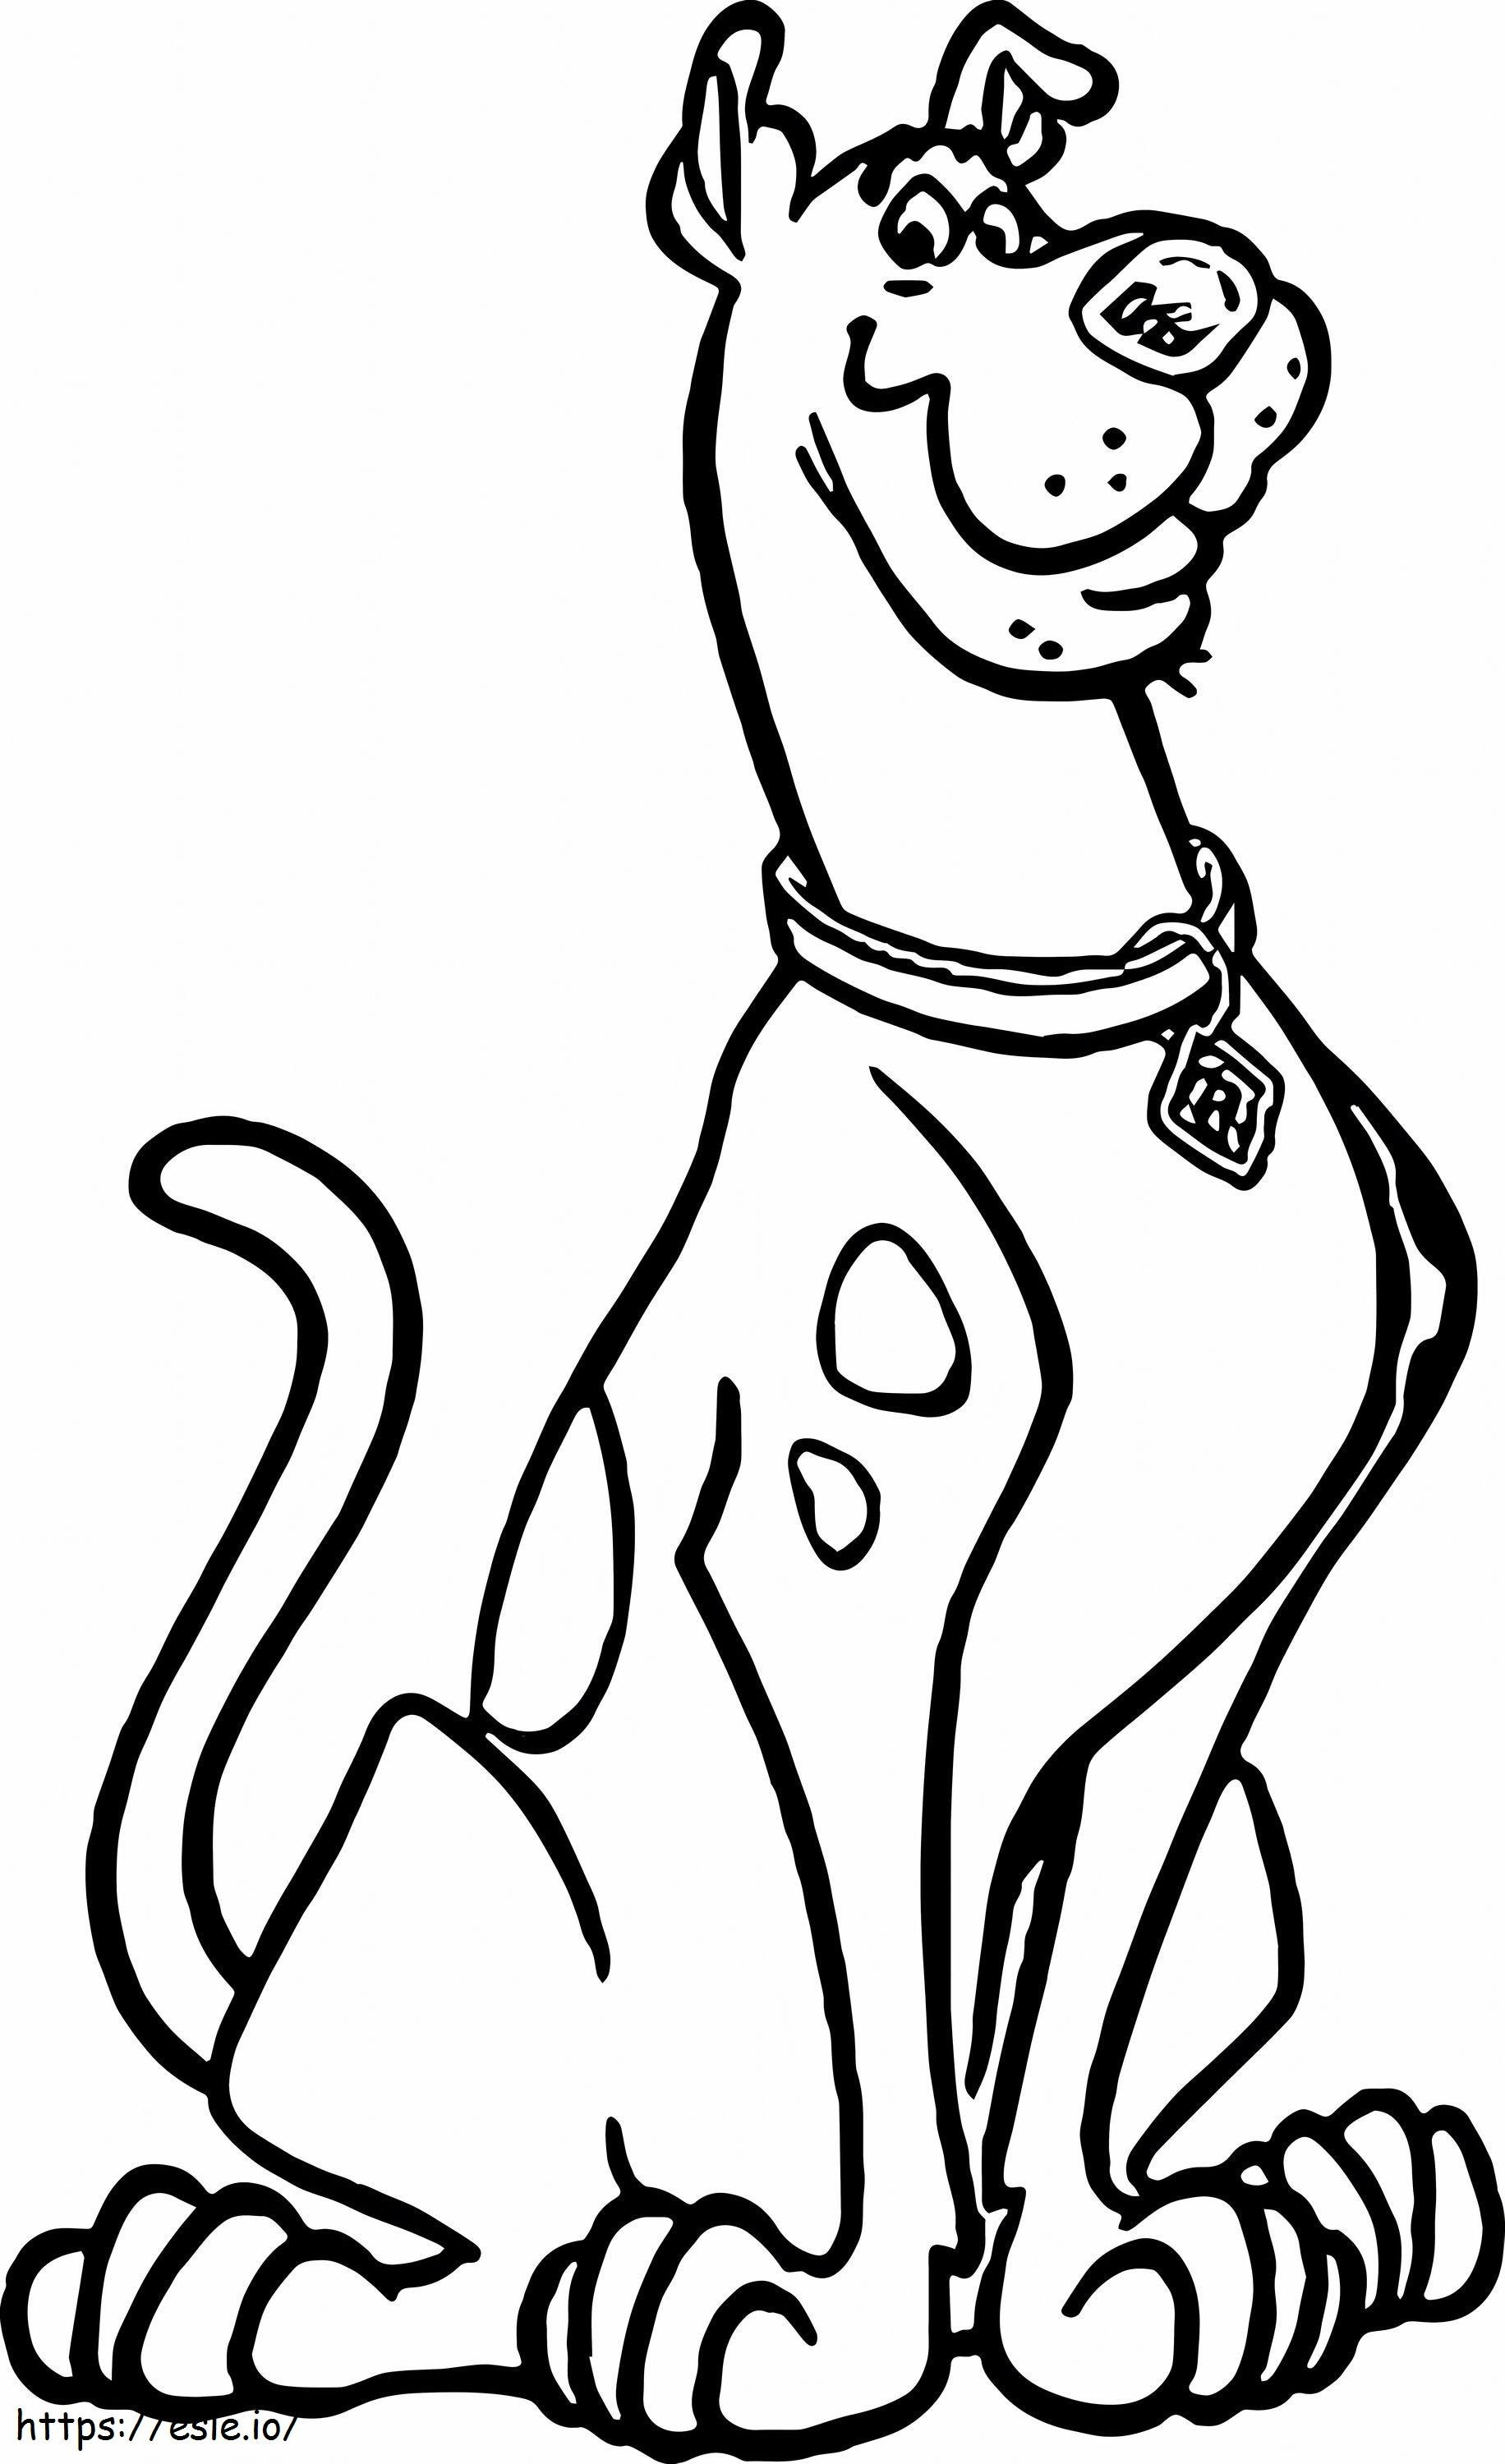  Scooby Doo Coloring Pictures To Print Fresh Scooby Doo Scoo Doo Cartoon Drawing Dog Scoo Doo Of Scooby Doo Coloring Pictures To Print Scaled 2 para colorir